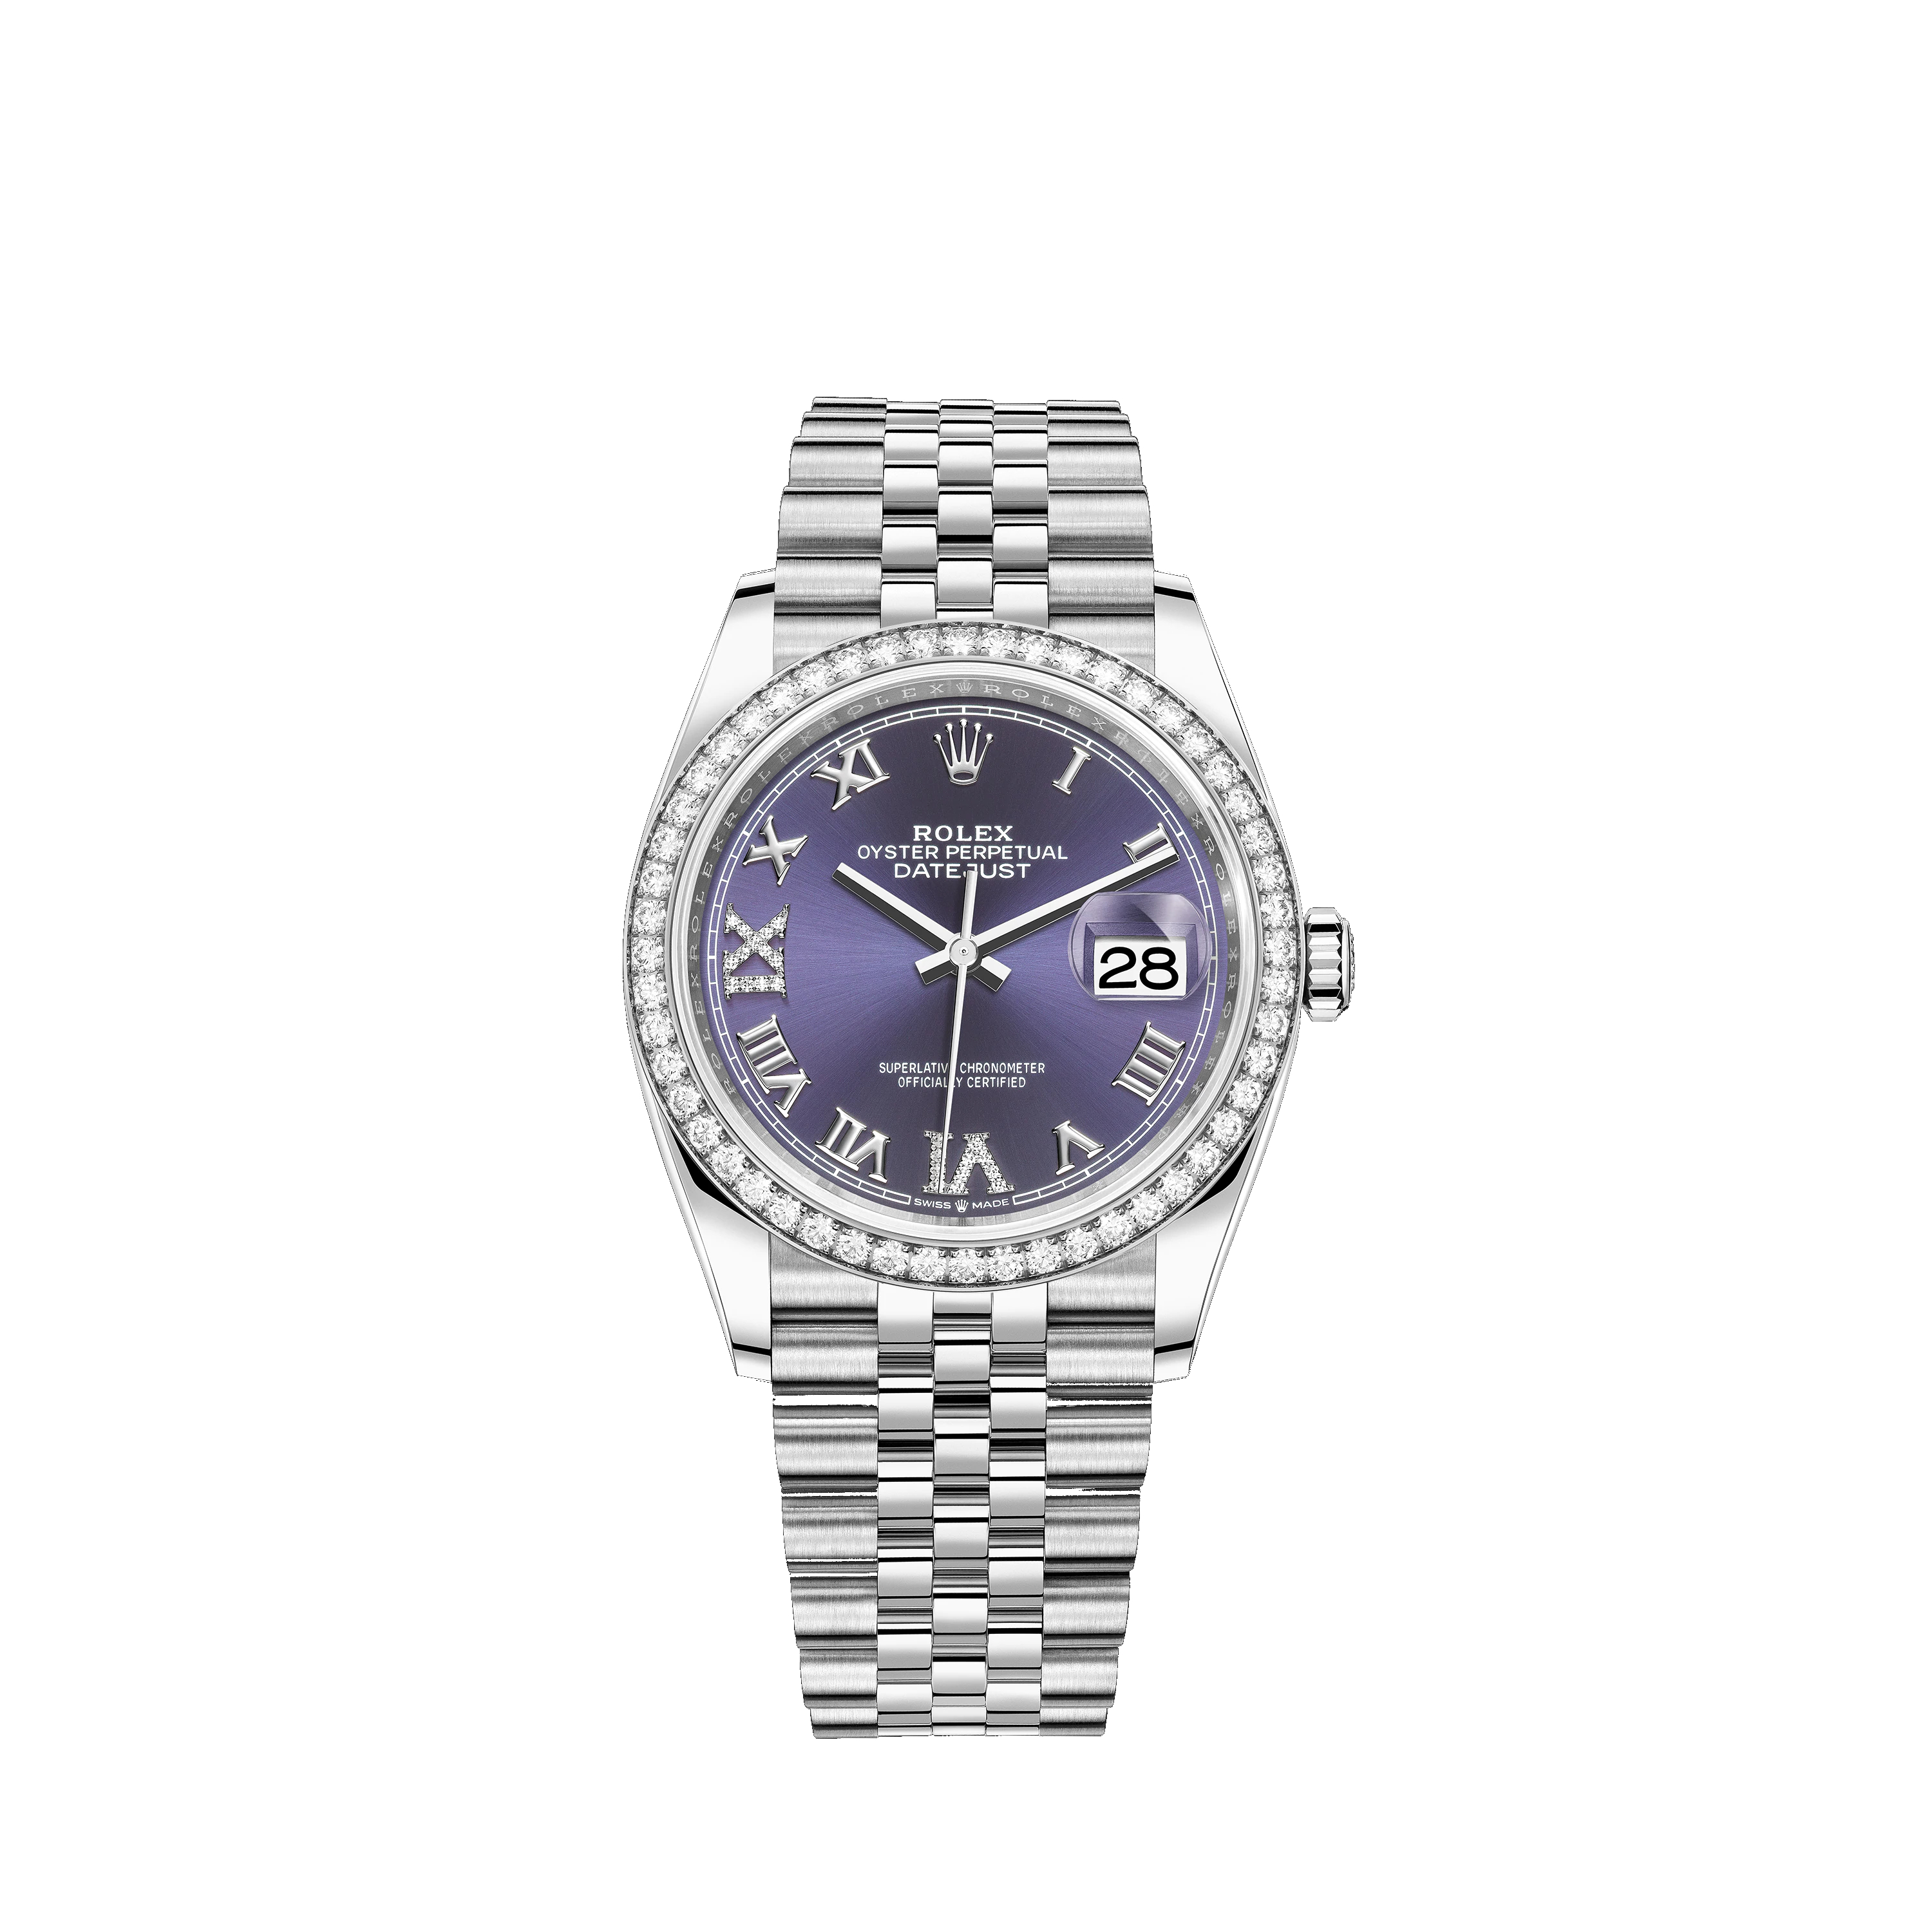 Datejust 36 126284RBR White Gold, Stainless Steel & Diamonds Watch (Aubergine Set with Diamonds) - Click Image to Close